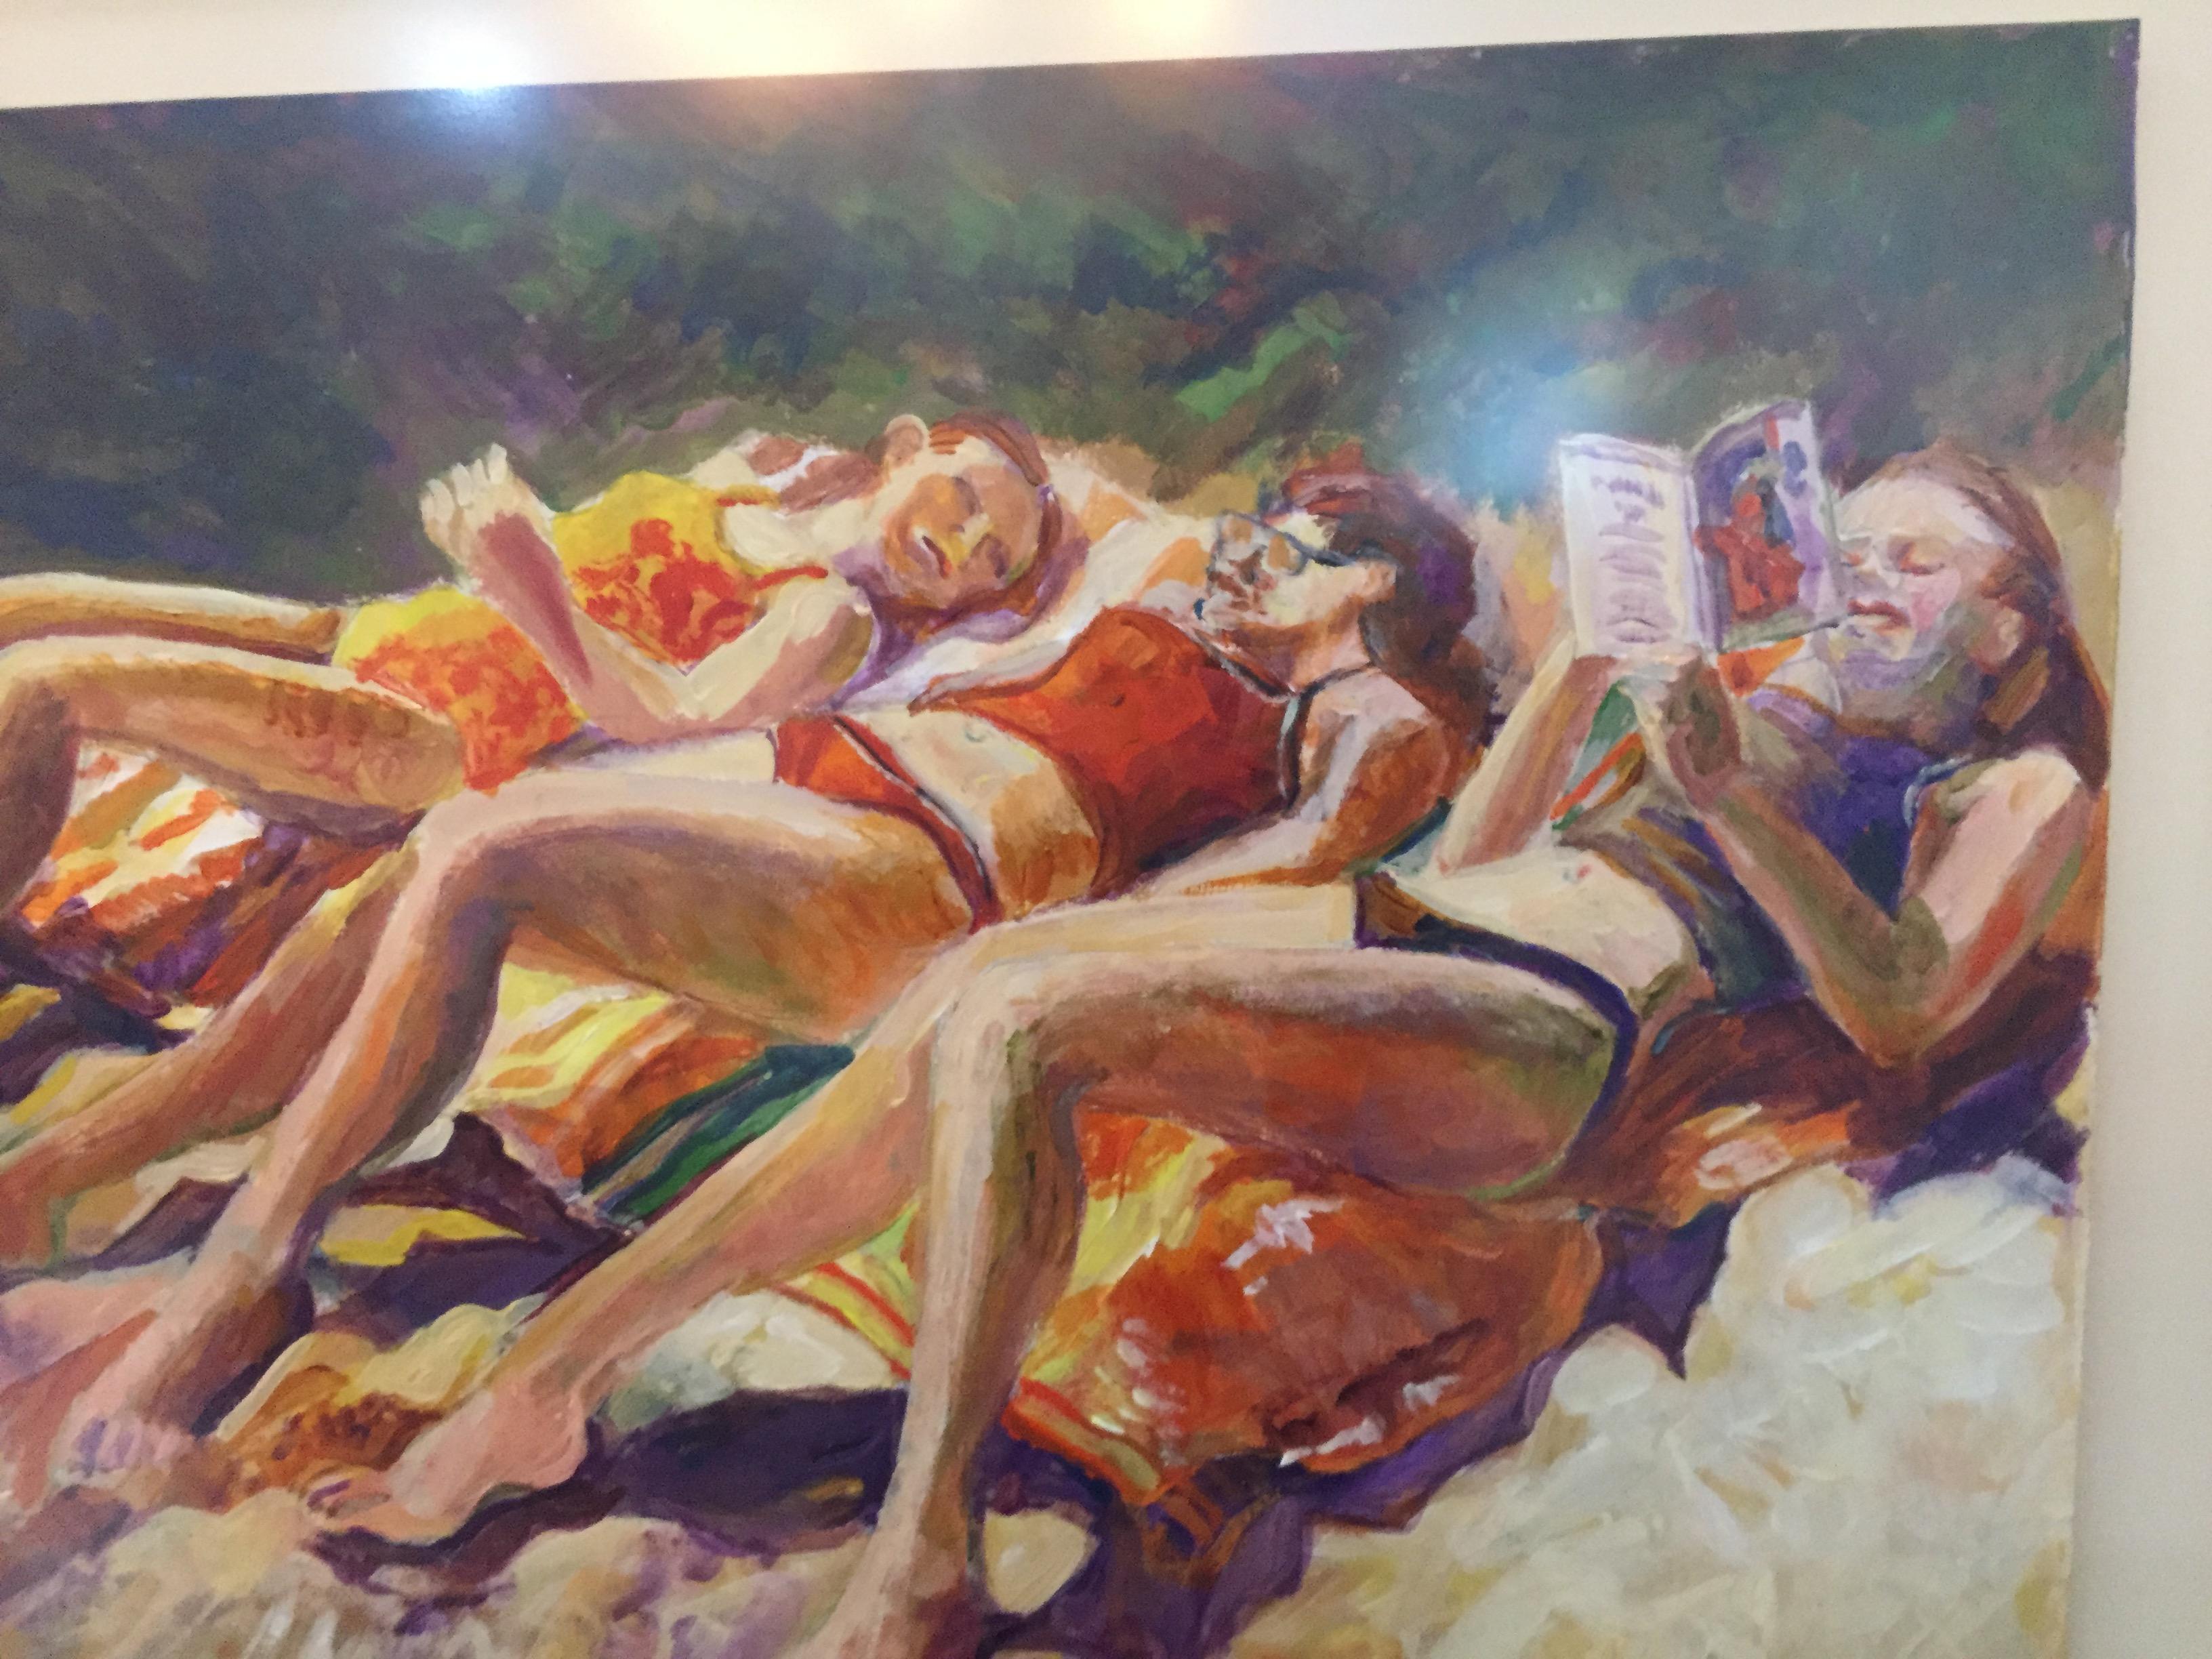 Hand-Painted Sunbathers Beach Scene Watercolor Painting by Selma Alden For Sale